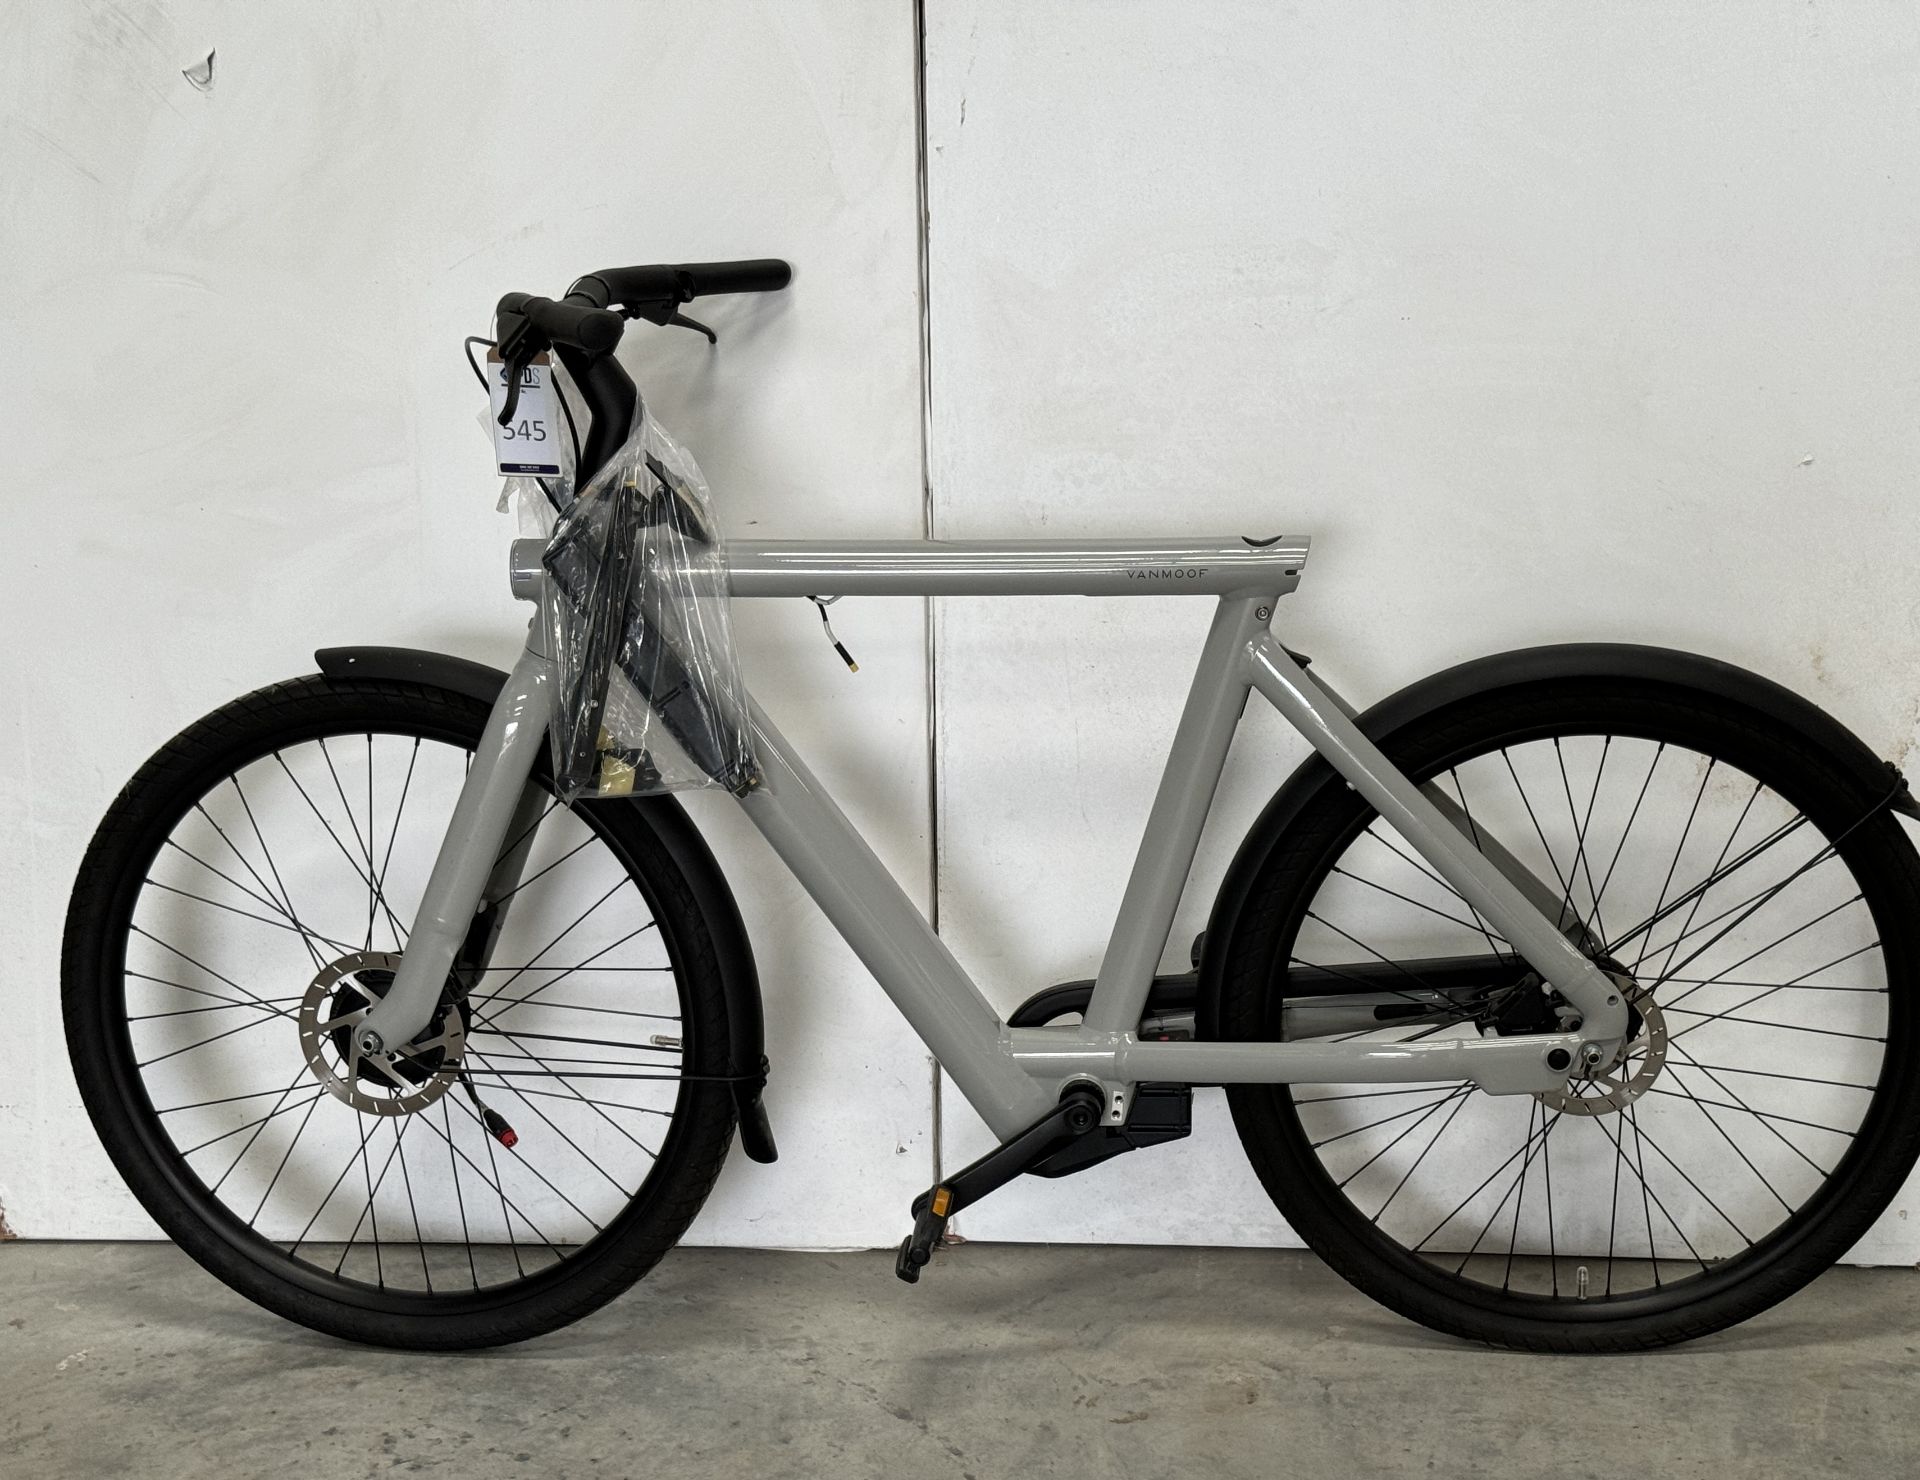 VanMoof S5 Electric Bike, Frame Number SVTBGQ0026OA (NOT ROADWORTHY - FOR SPARES ONLY) (No codes